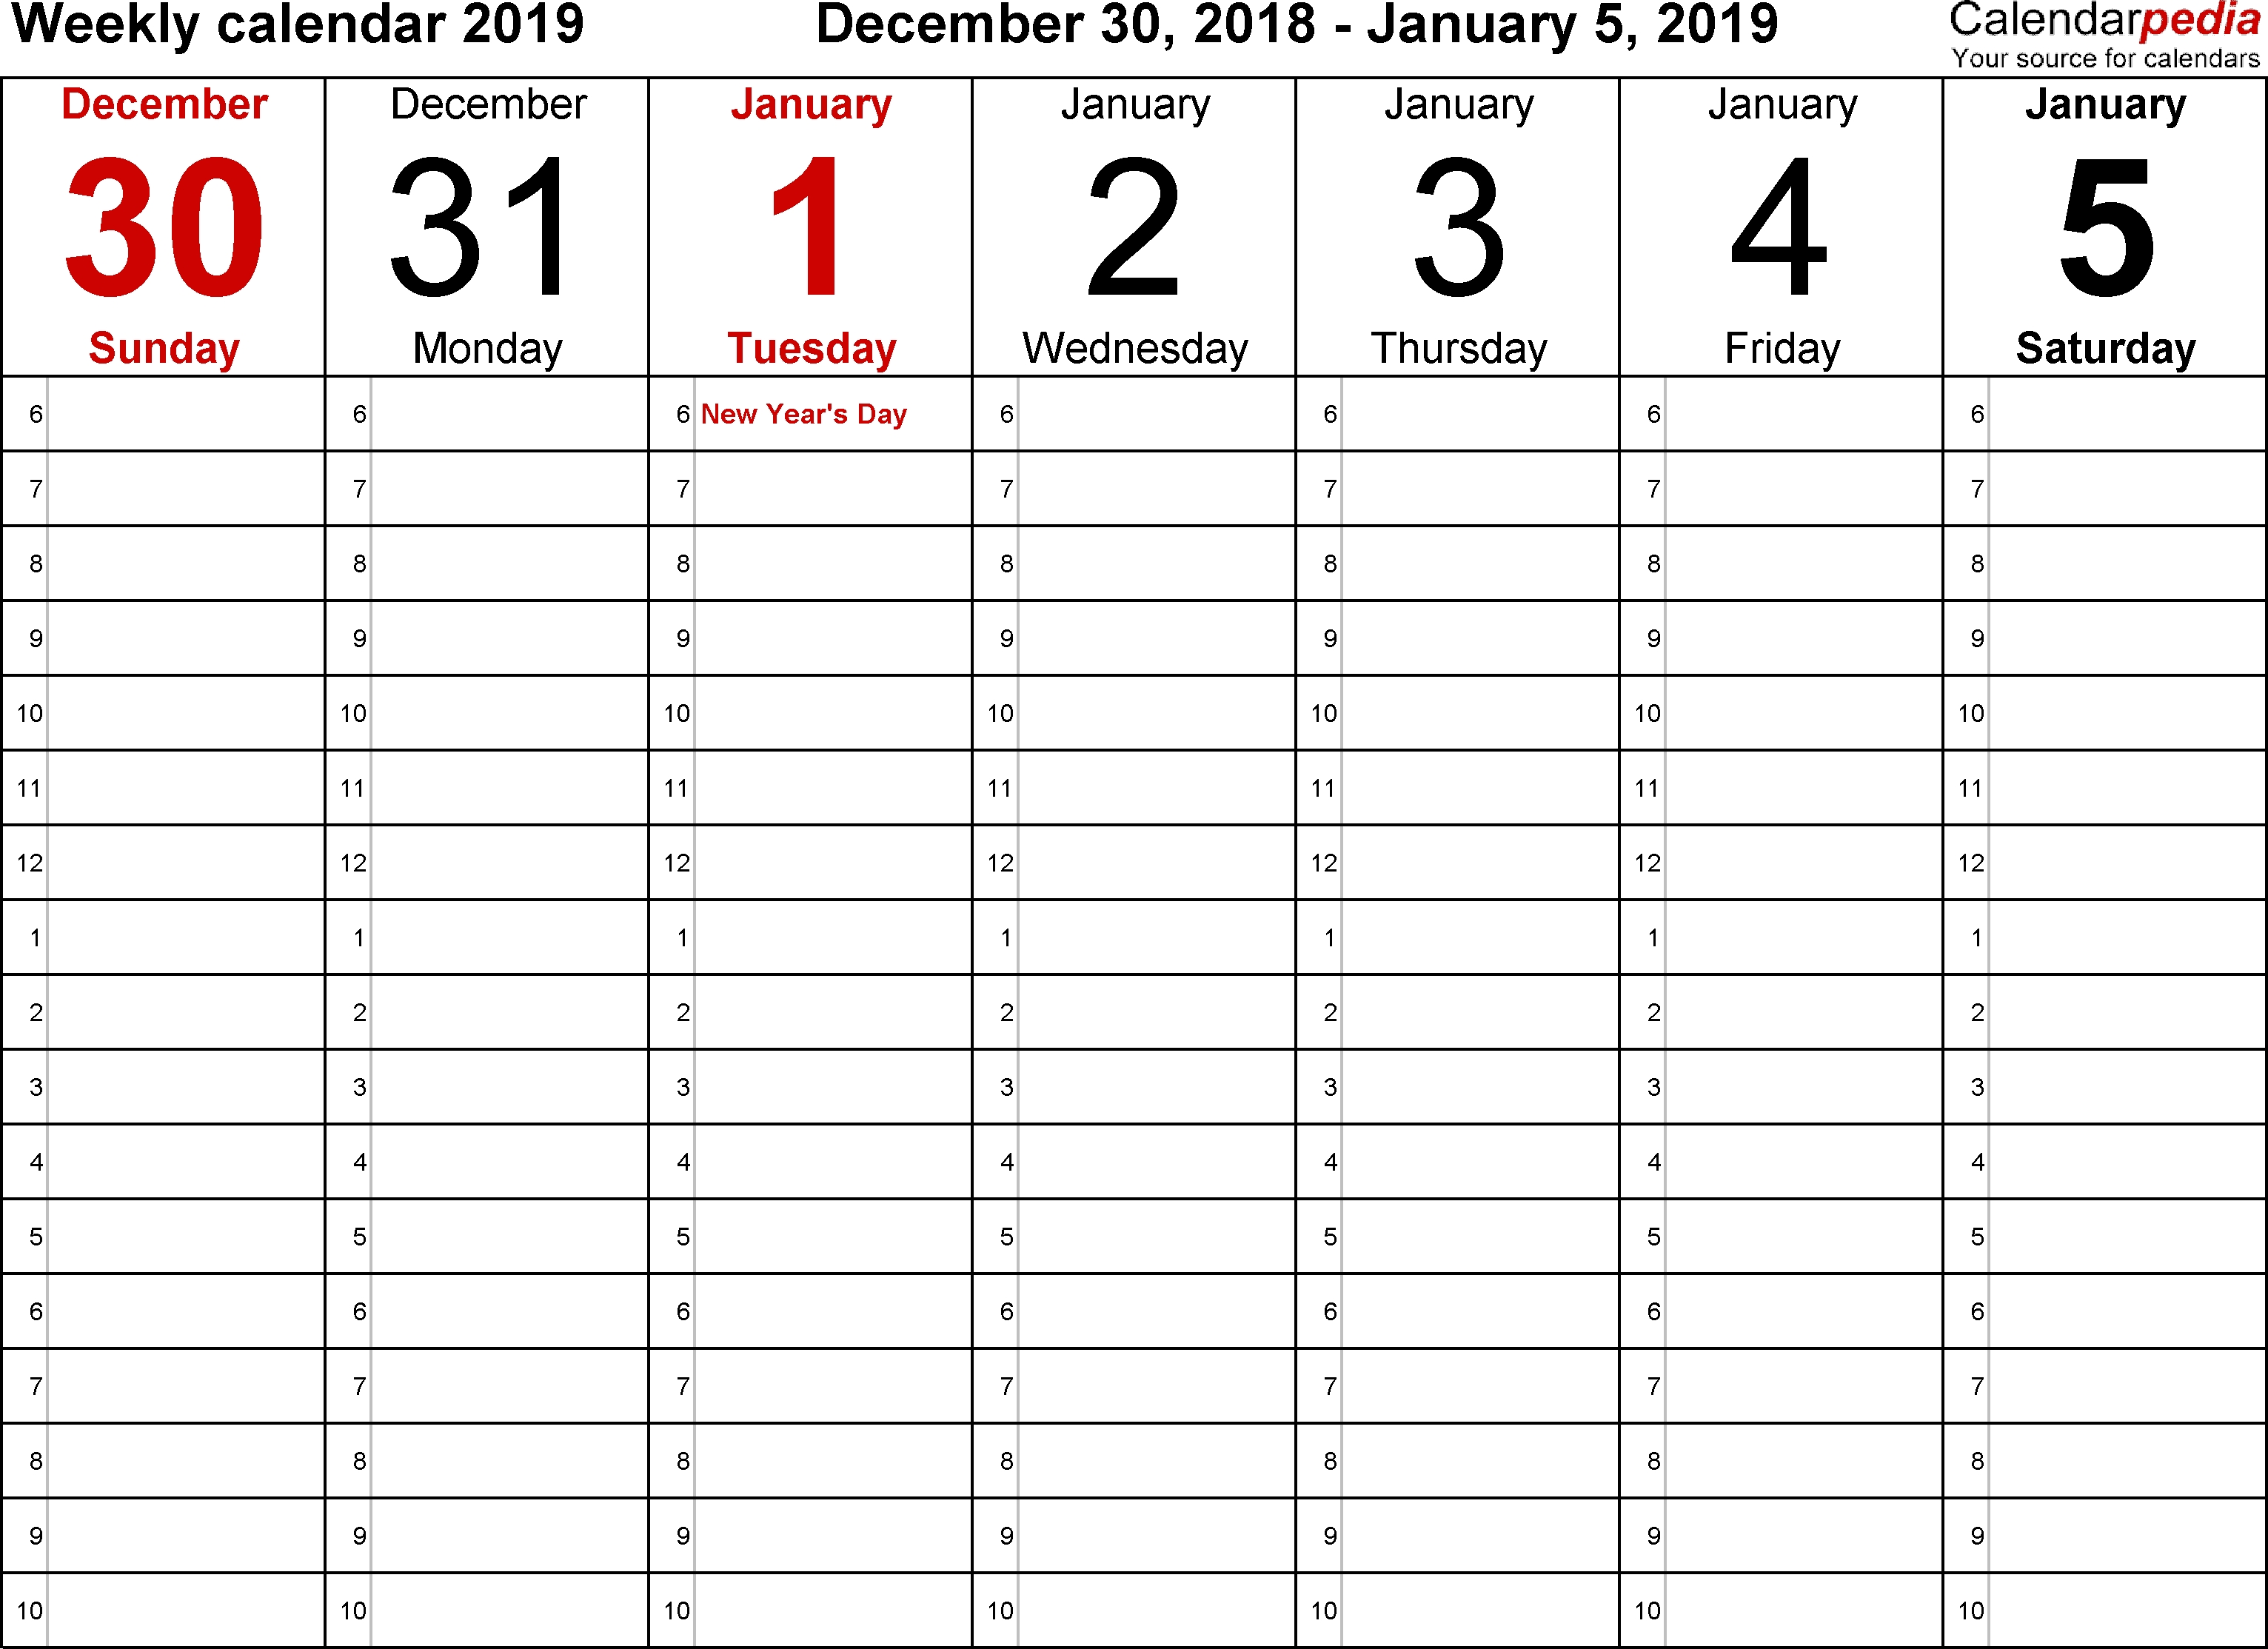 Weekly Calendar 2019 For Word - 12 Free Printable Templates intended for 5X8 Calendar Planner Templates Printable